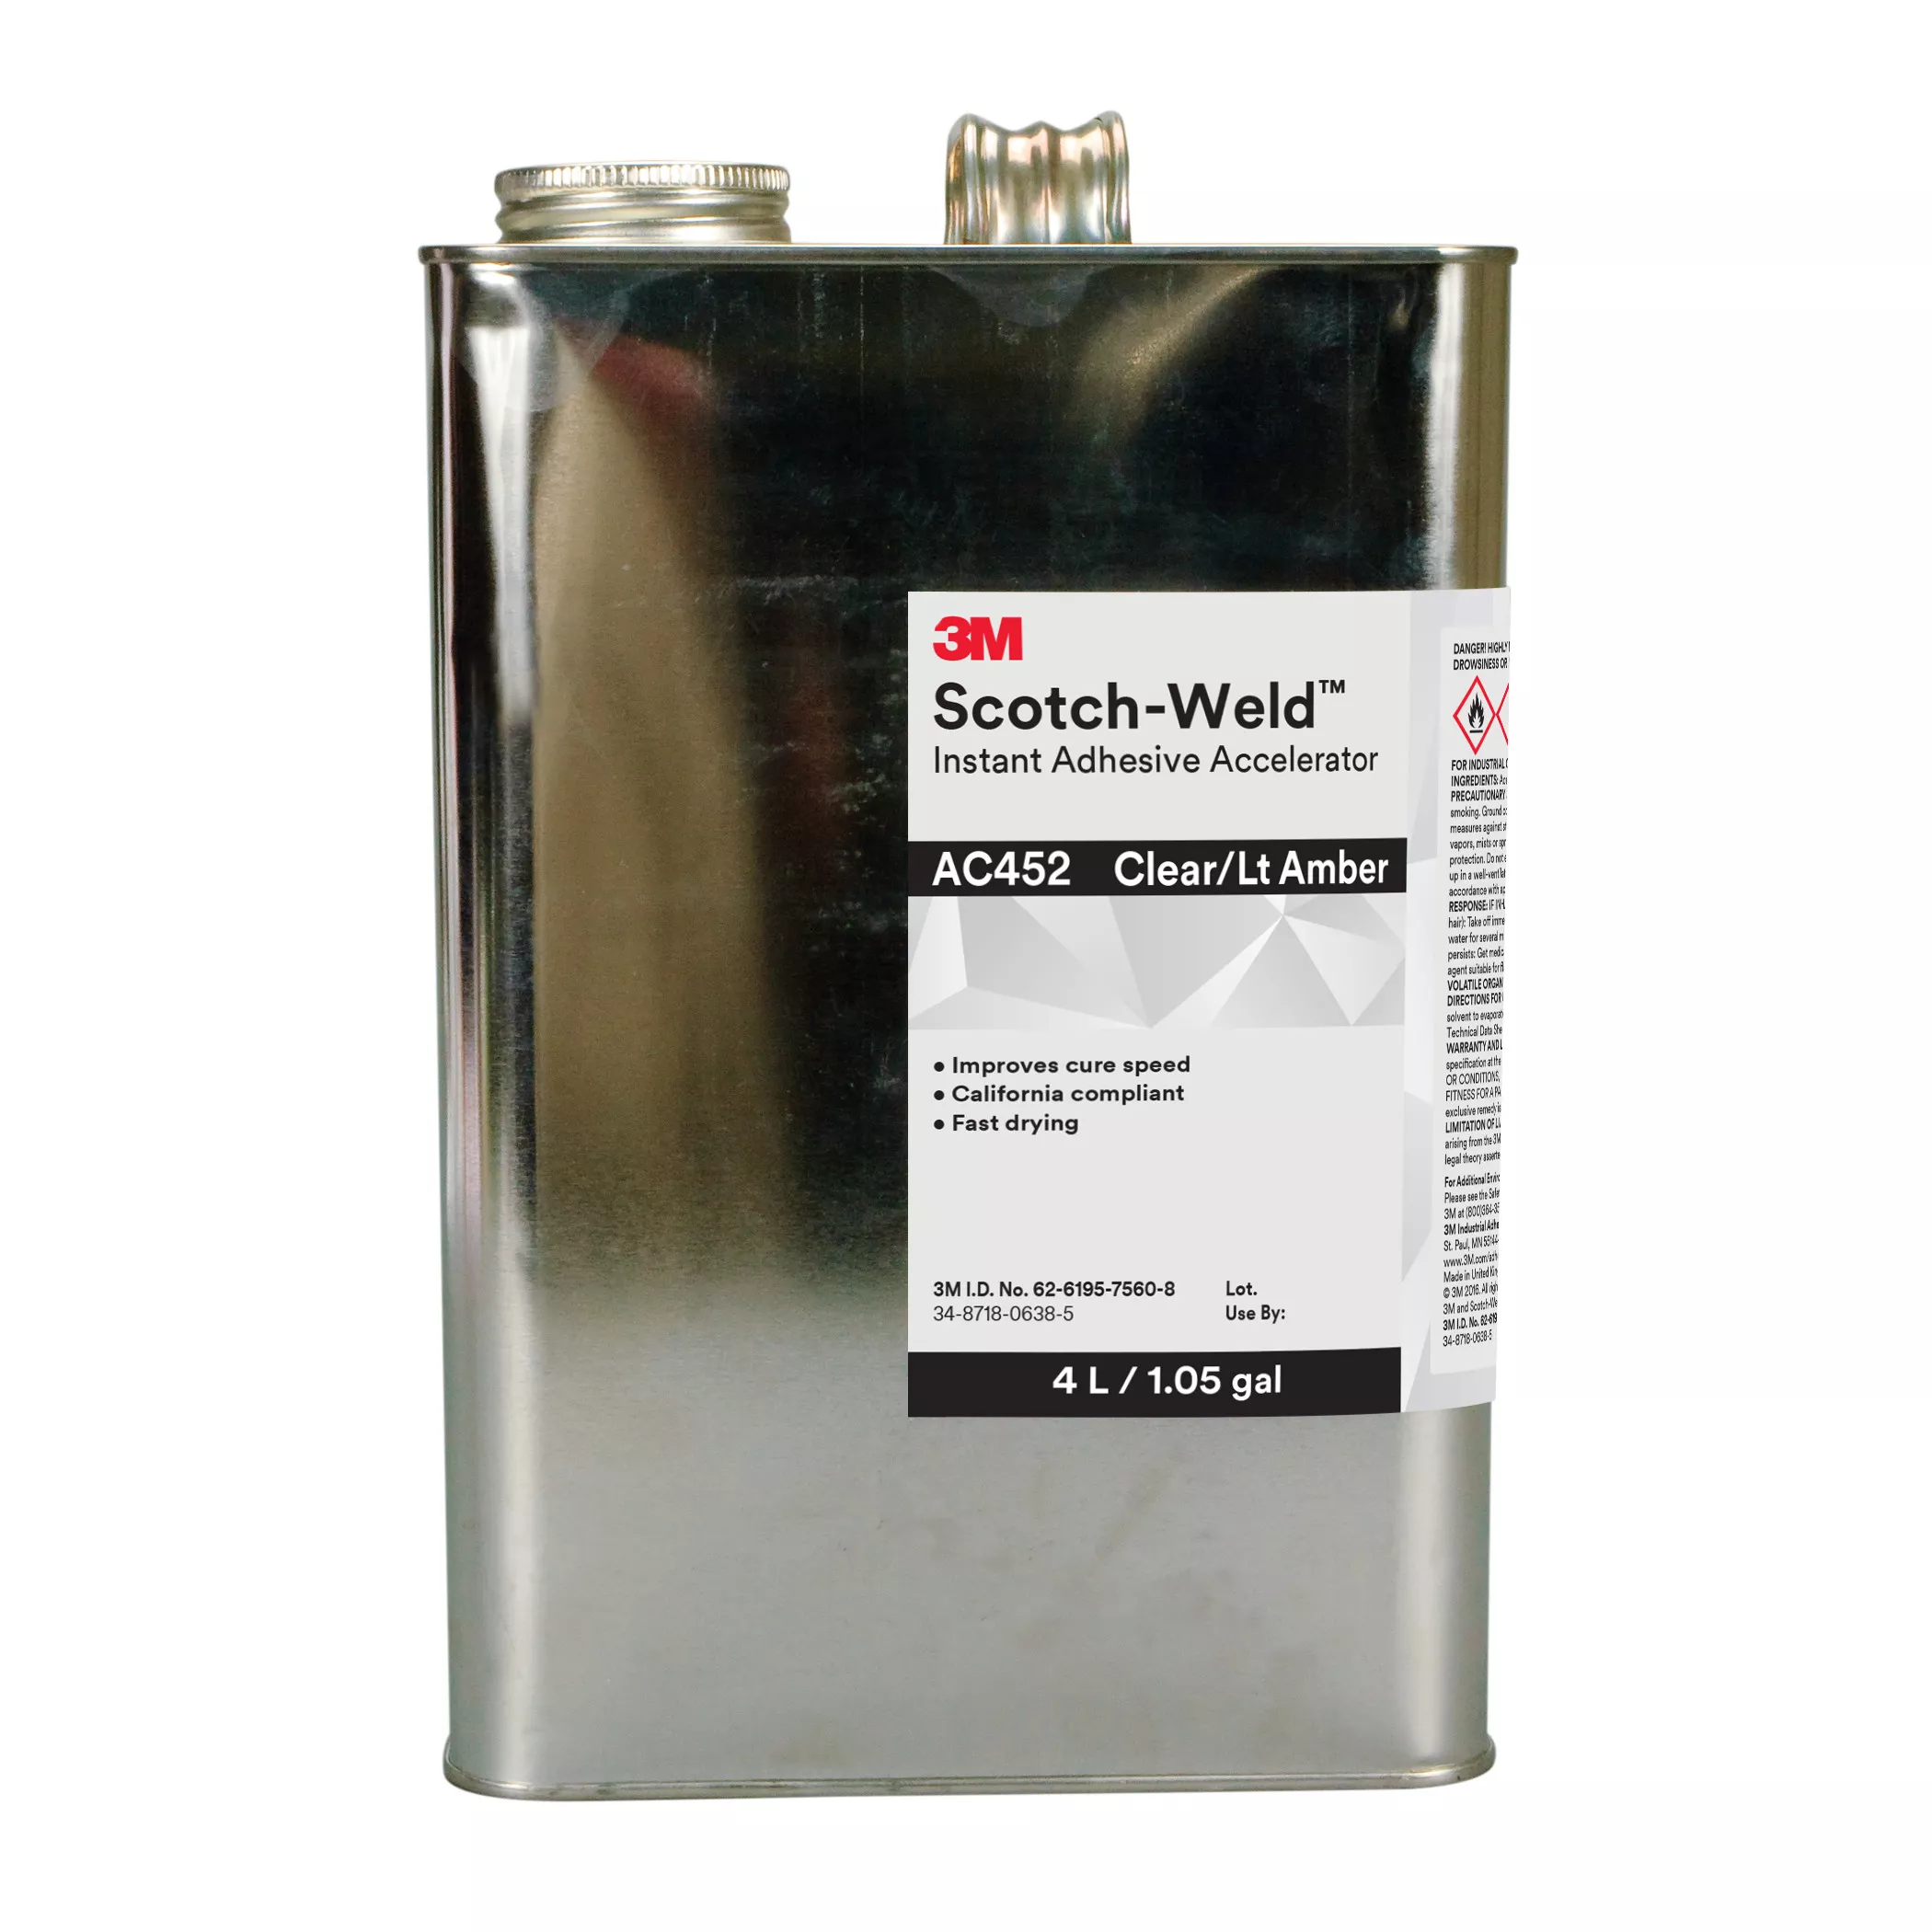 3M™ Scotch-Weld™ Instant Adhesive Accelerator AC452, Amber, 4 Liter, 1
Can/Case